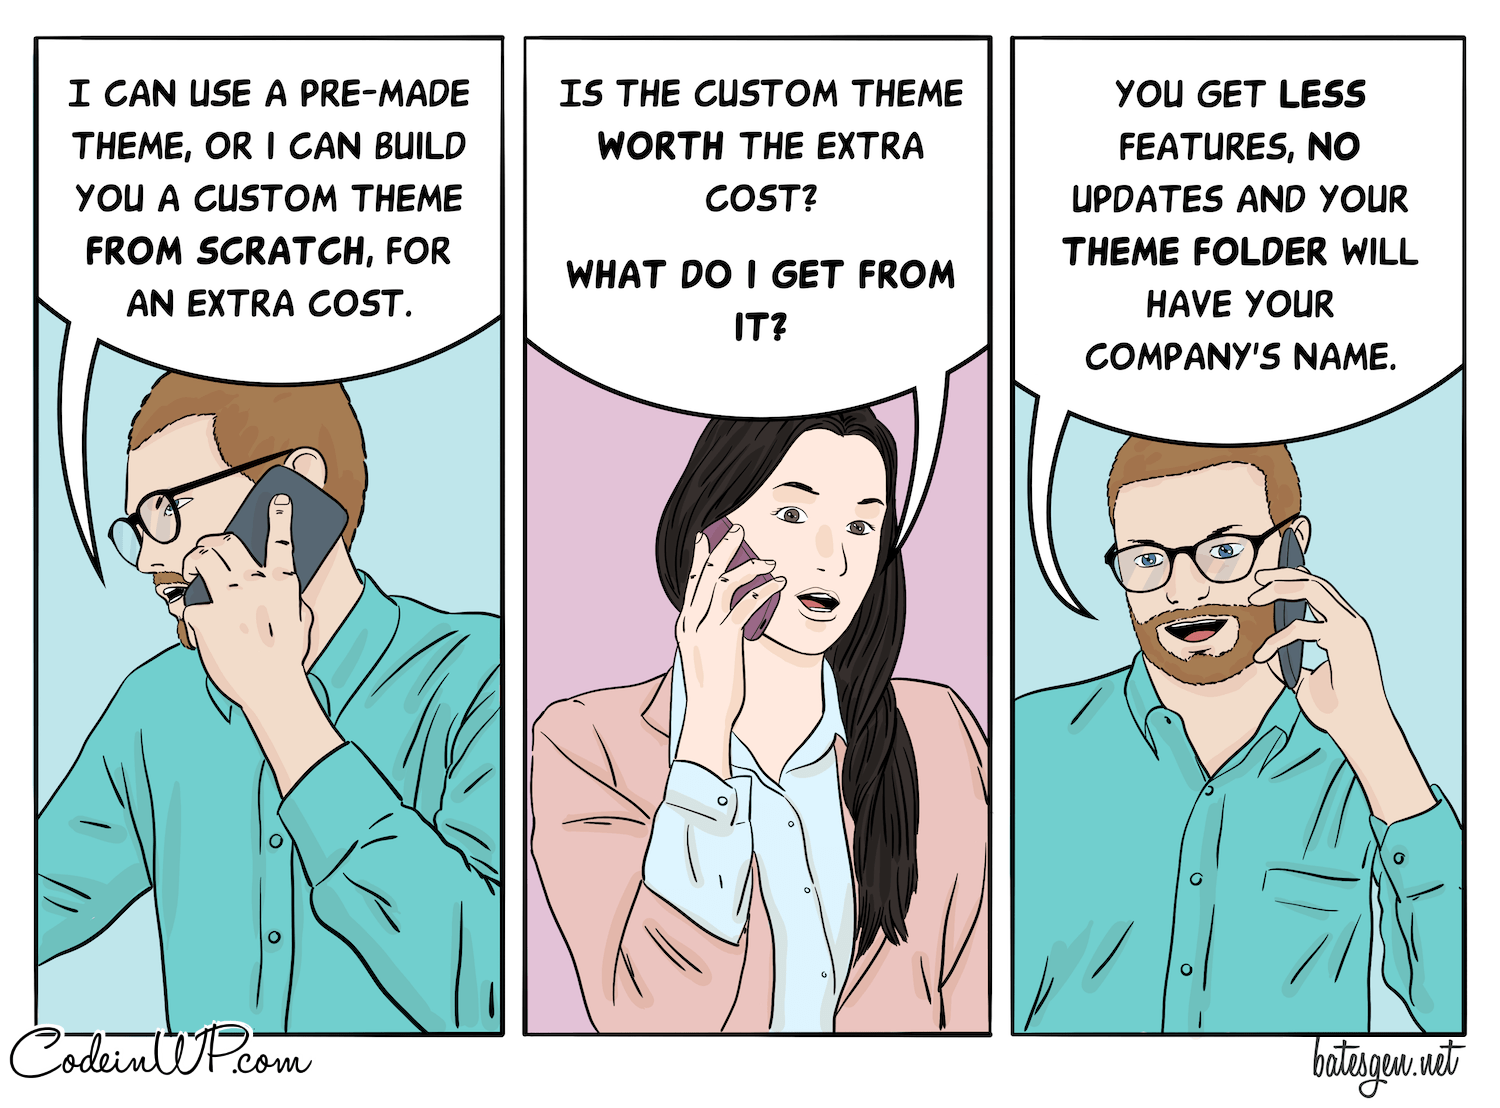 Tech comic on the difference between custom and pre-made WordPress themes